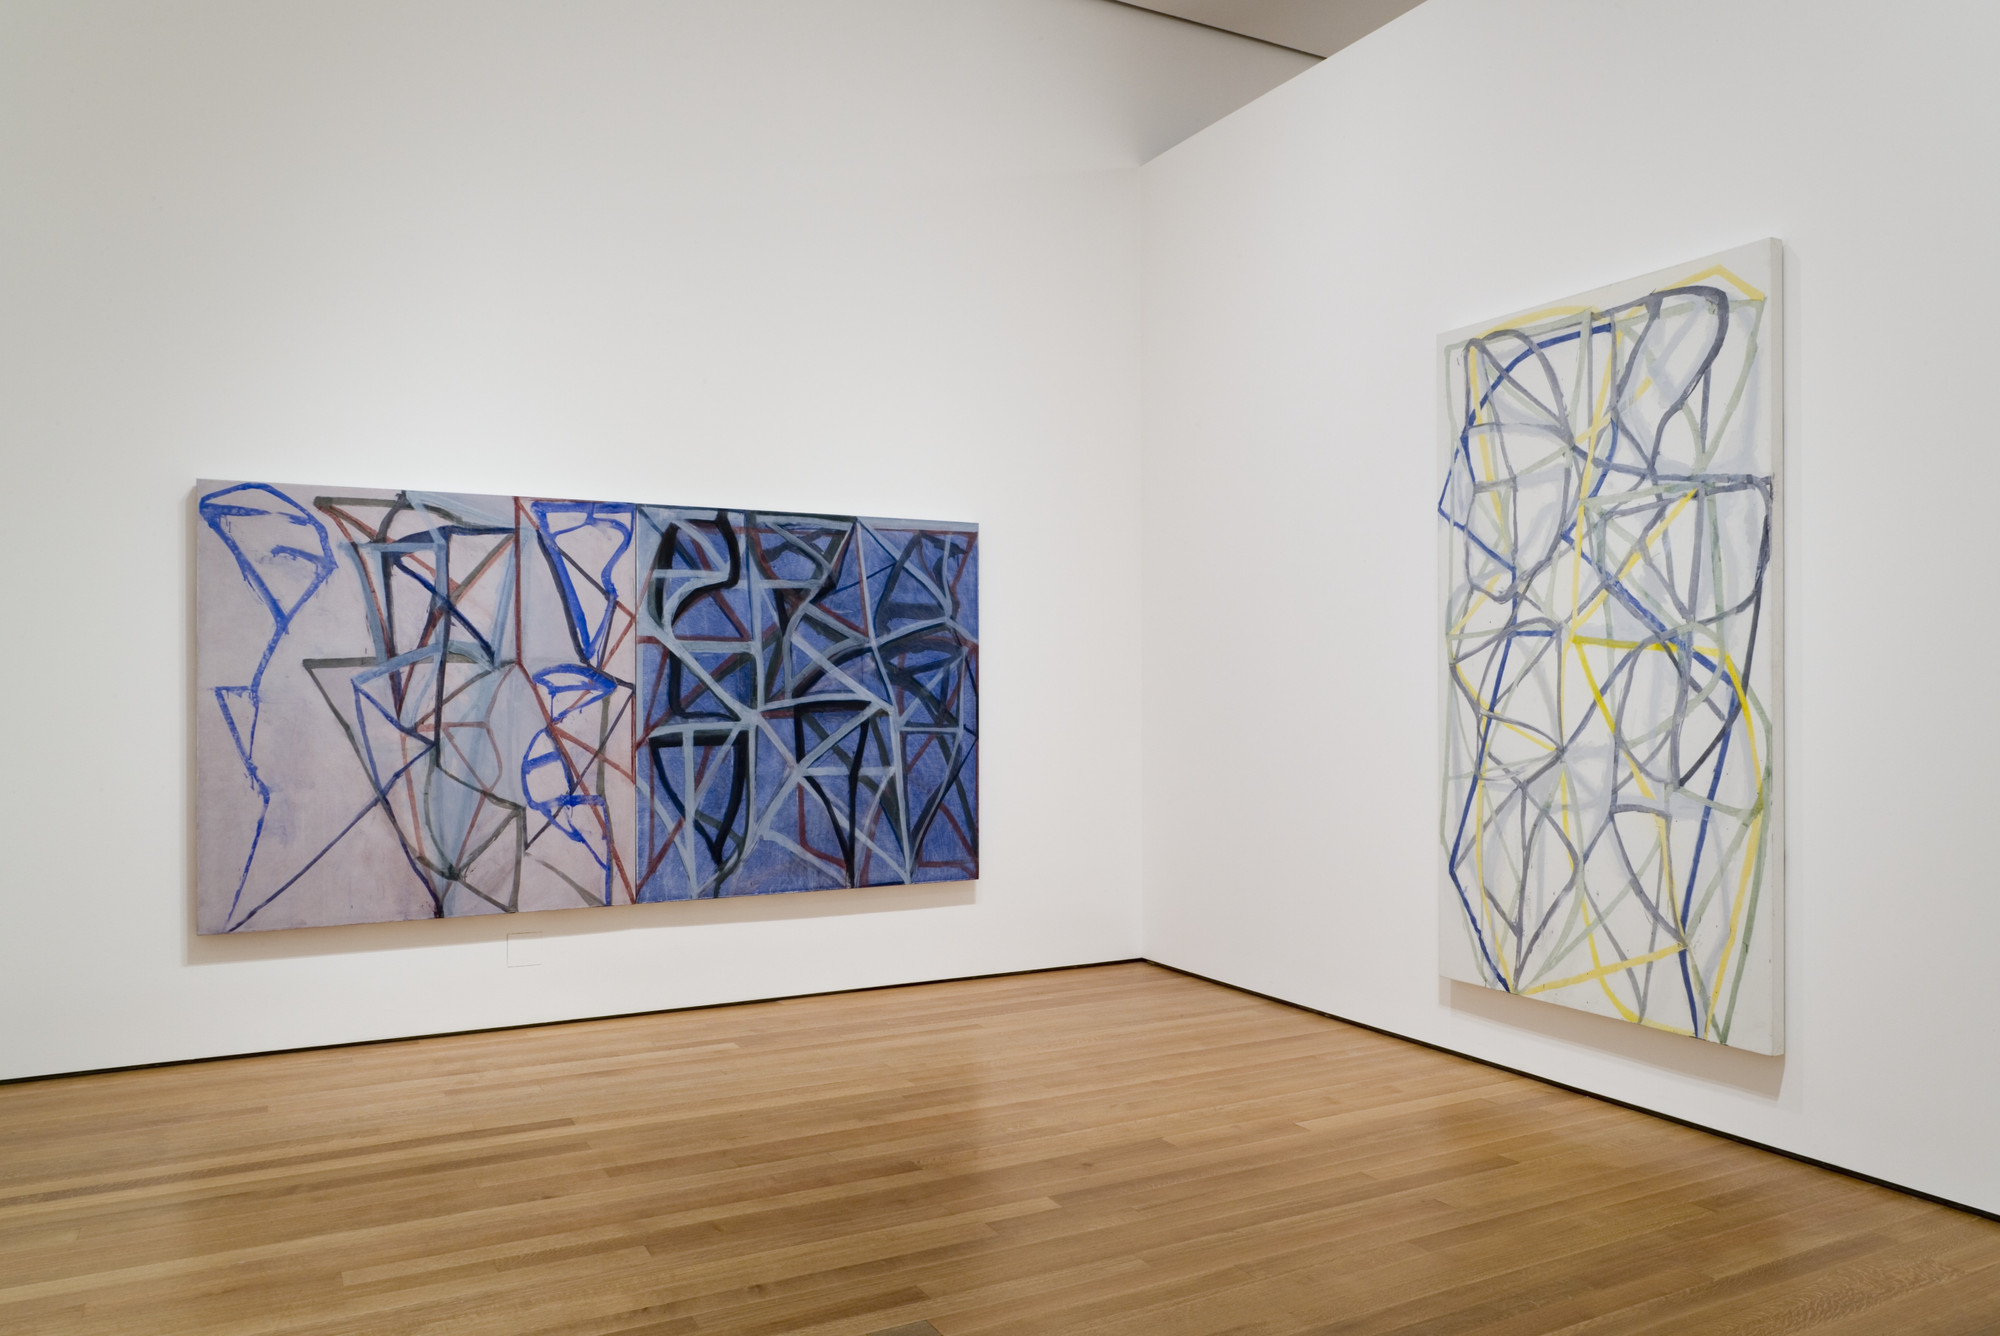 Installation view of the exhibition "Brice Marden A Retrospective of